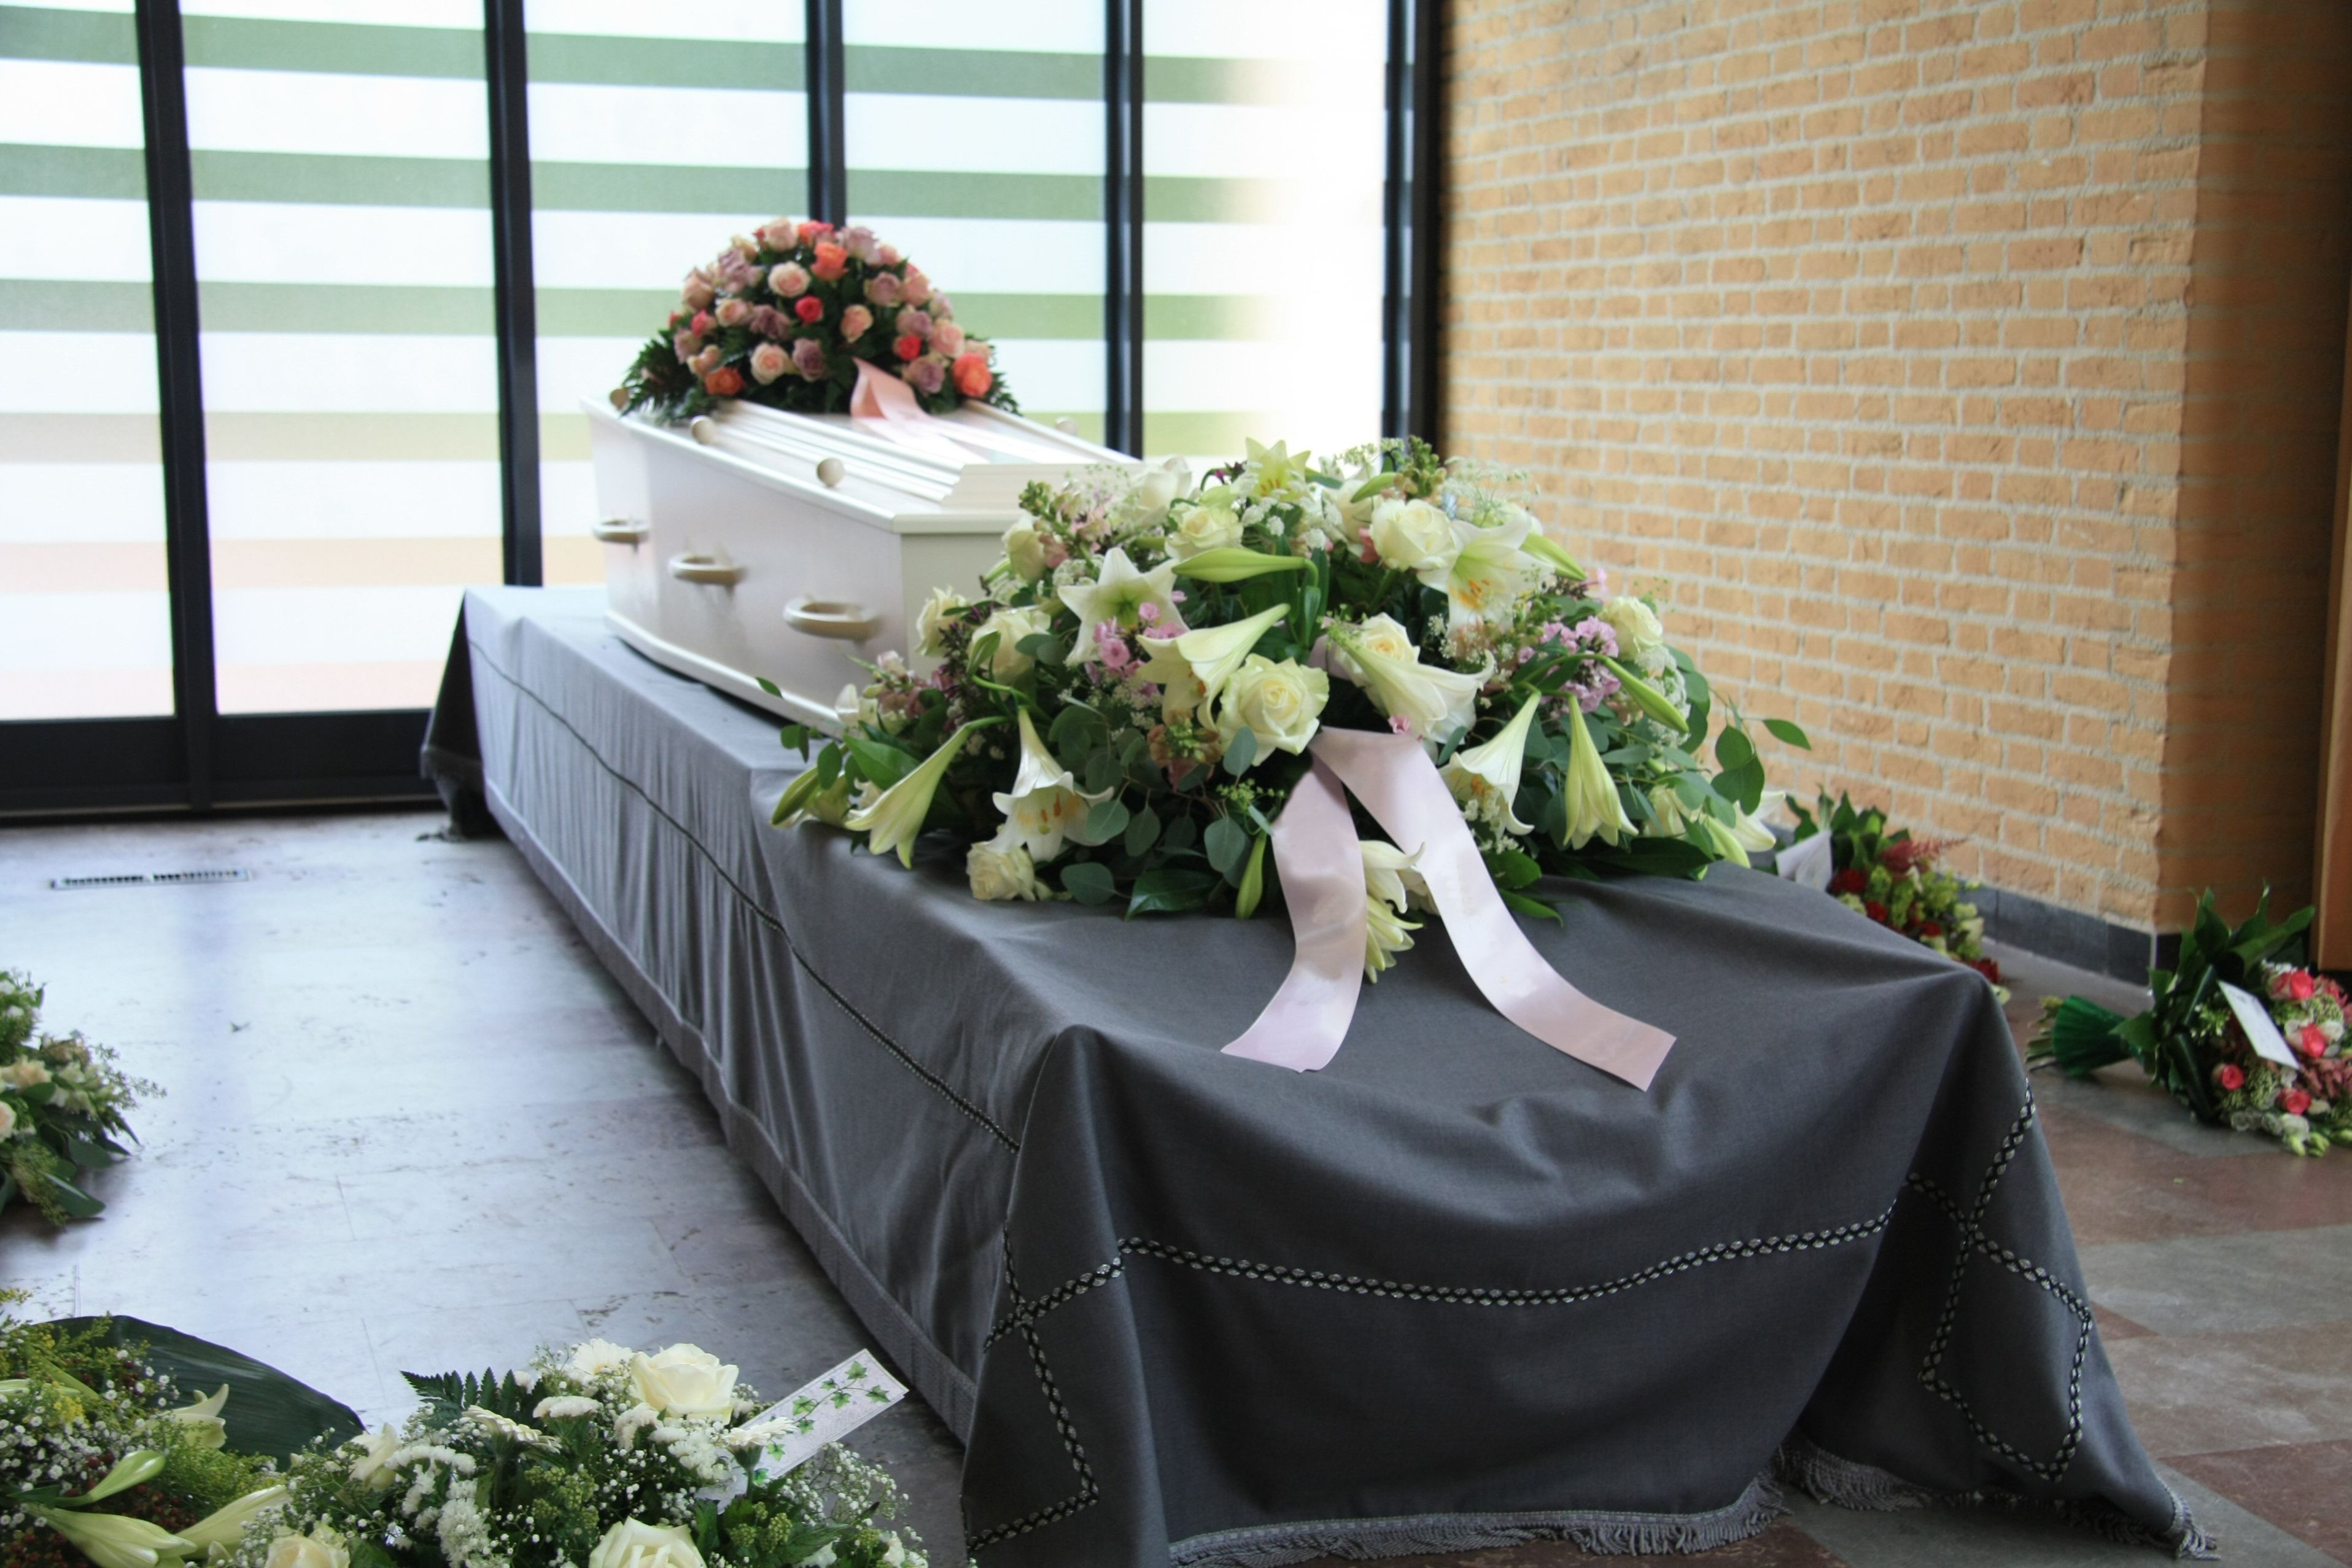 The Value Of A Funeral Service In Ashville, NC